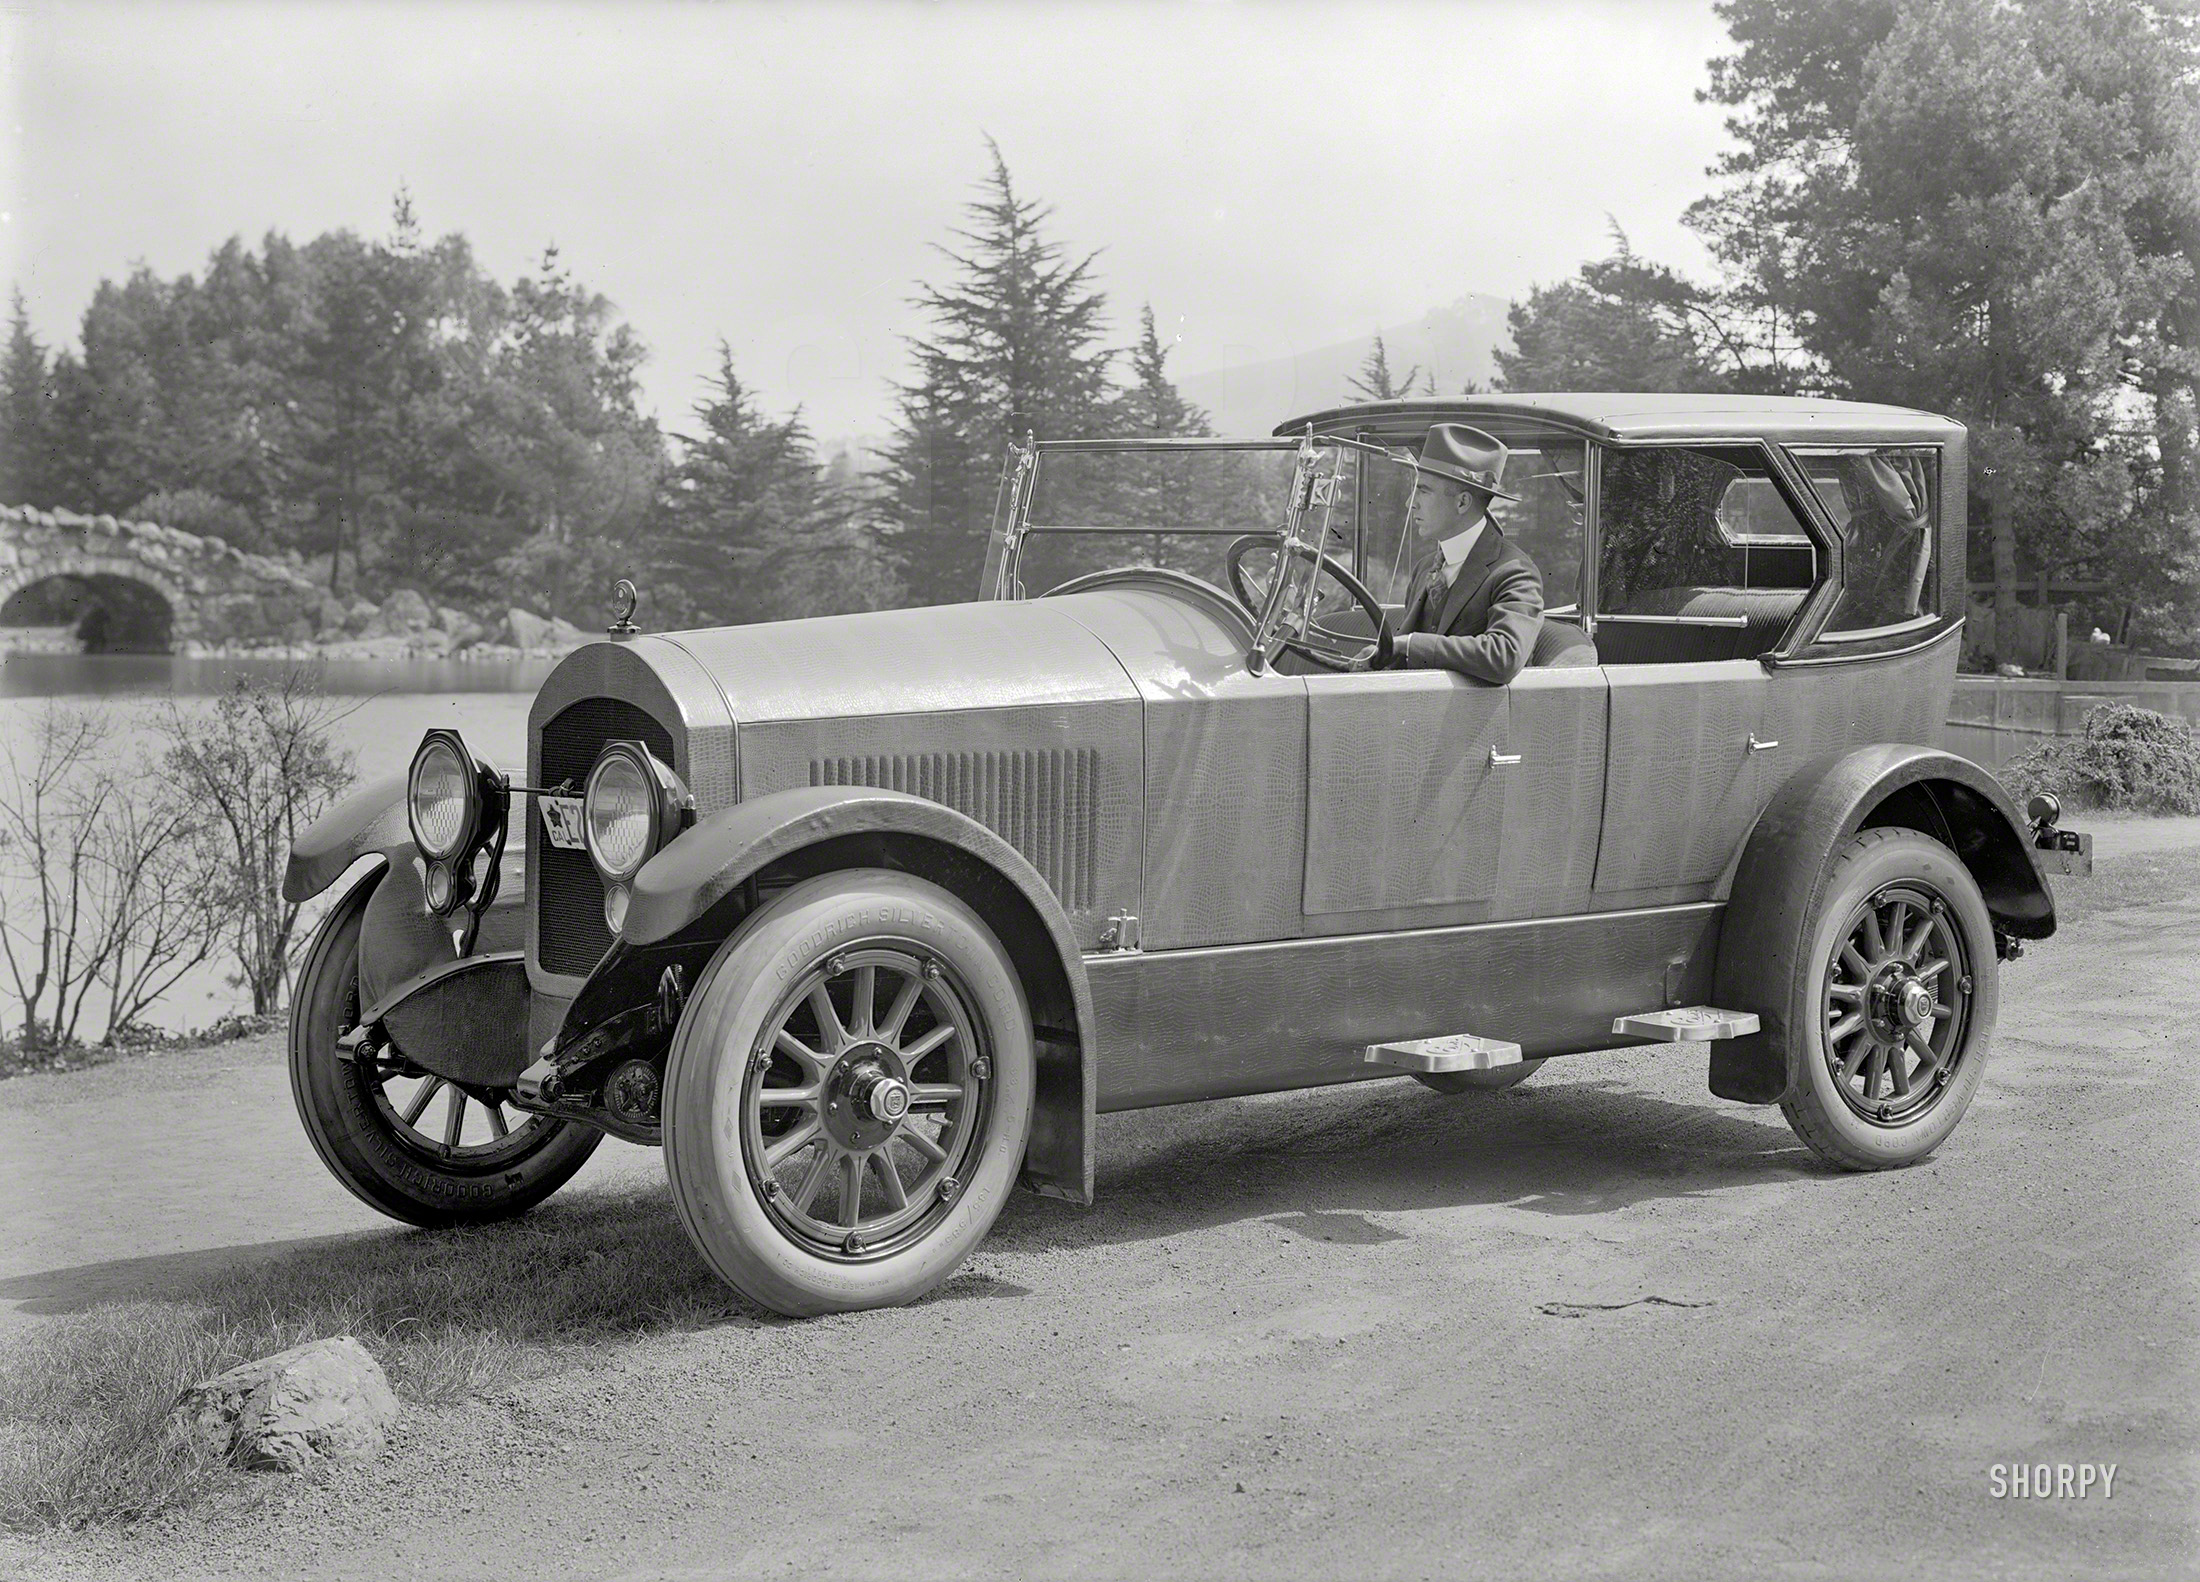 San Francisco circa 1919. "Cole touring car at Stow Lake, Golden Gate Park." Upholstered in alligator. 5x7 glass negative by Christopher Helin. View full size.